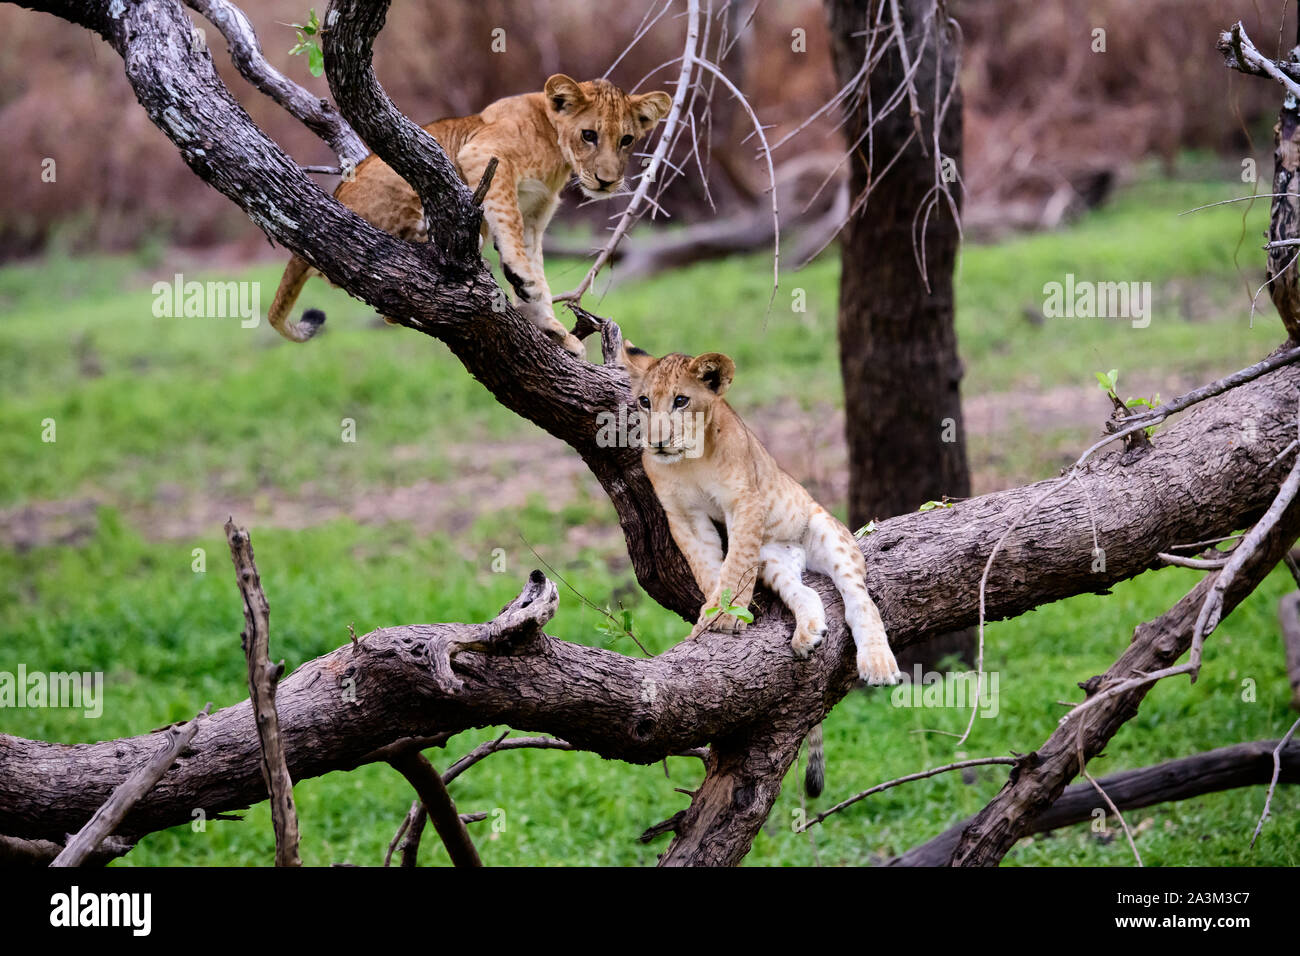 Lion cubs at play Stock Photo